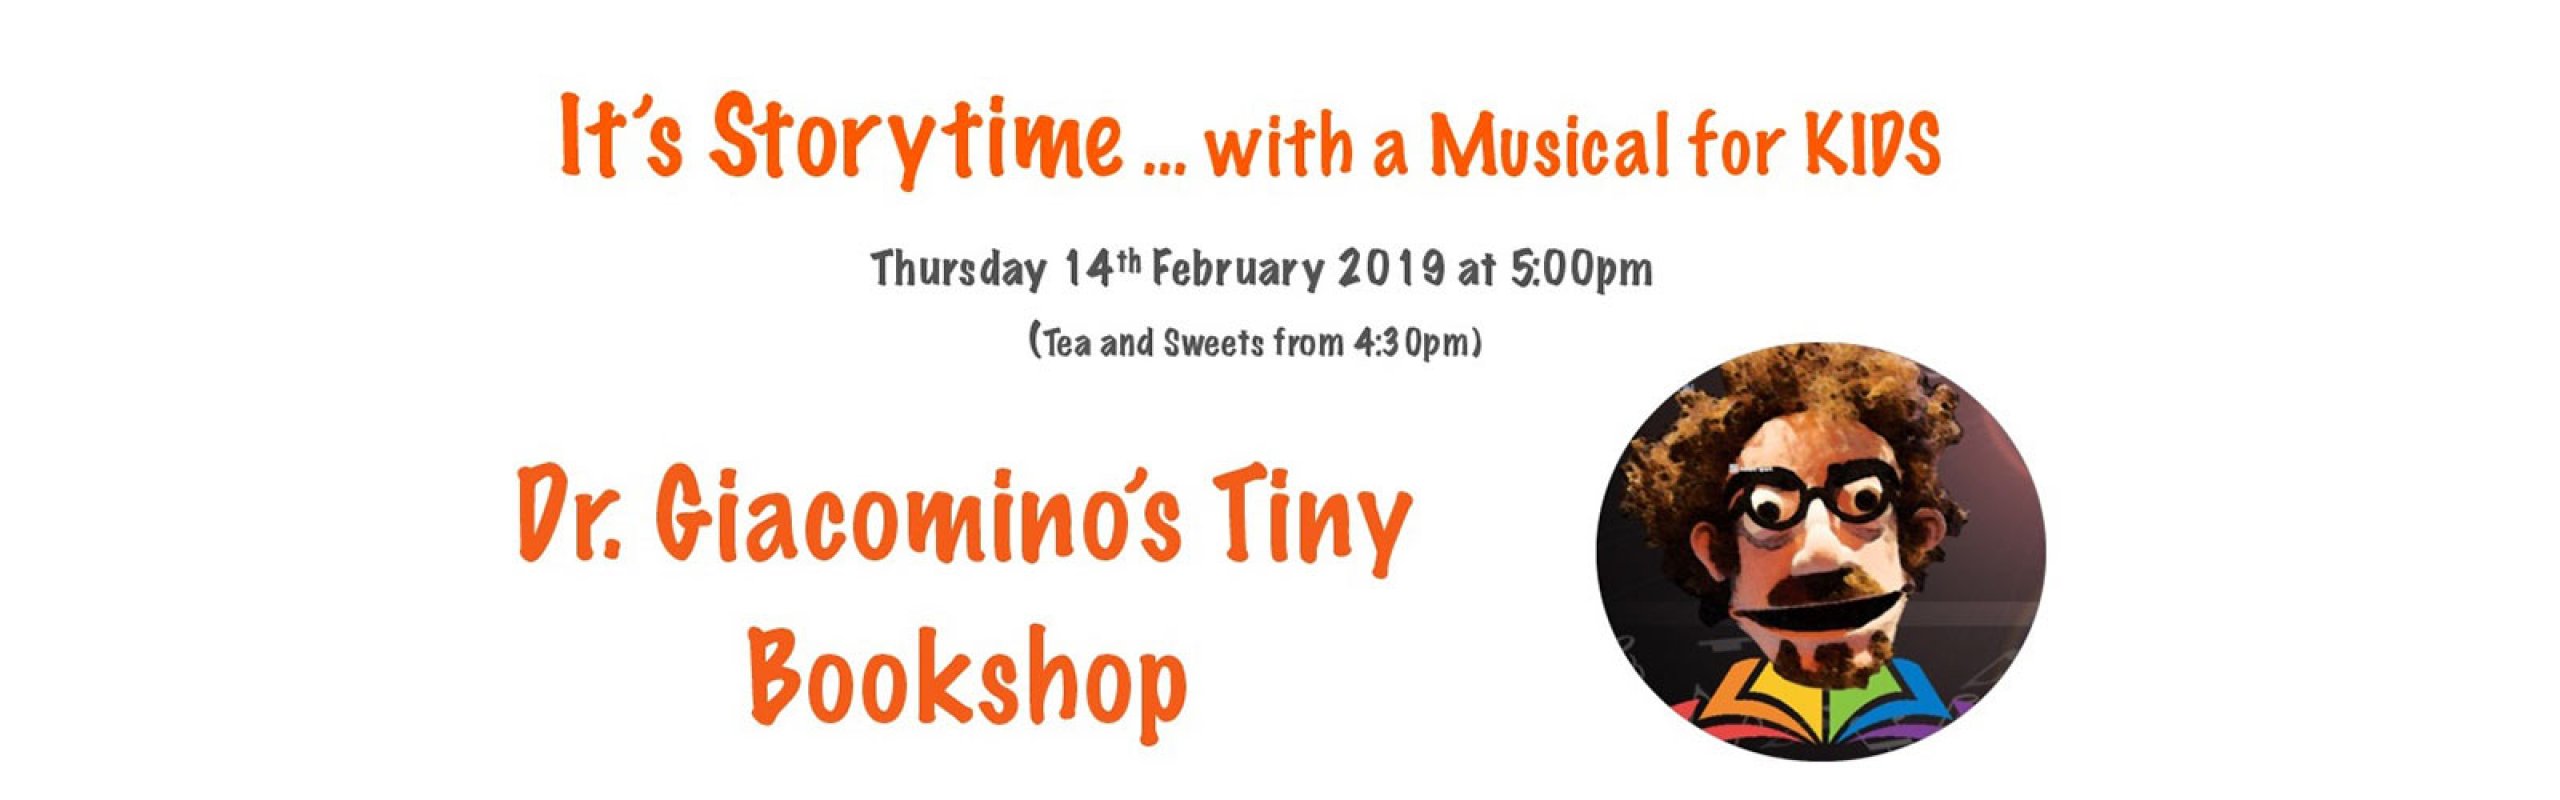 It's Storytime... con un Musical in inglese per bambini: Dr. Giacomino’s Tiny Bookshop